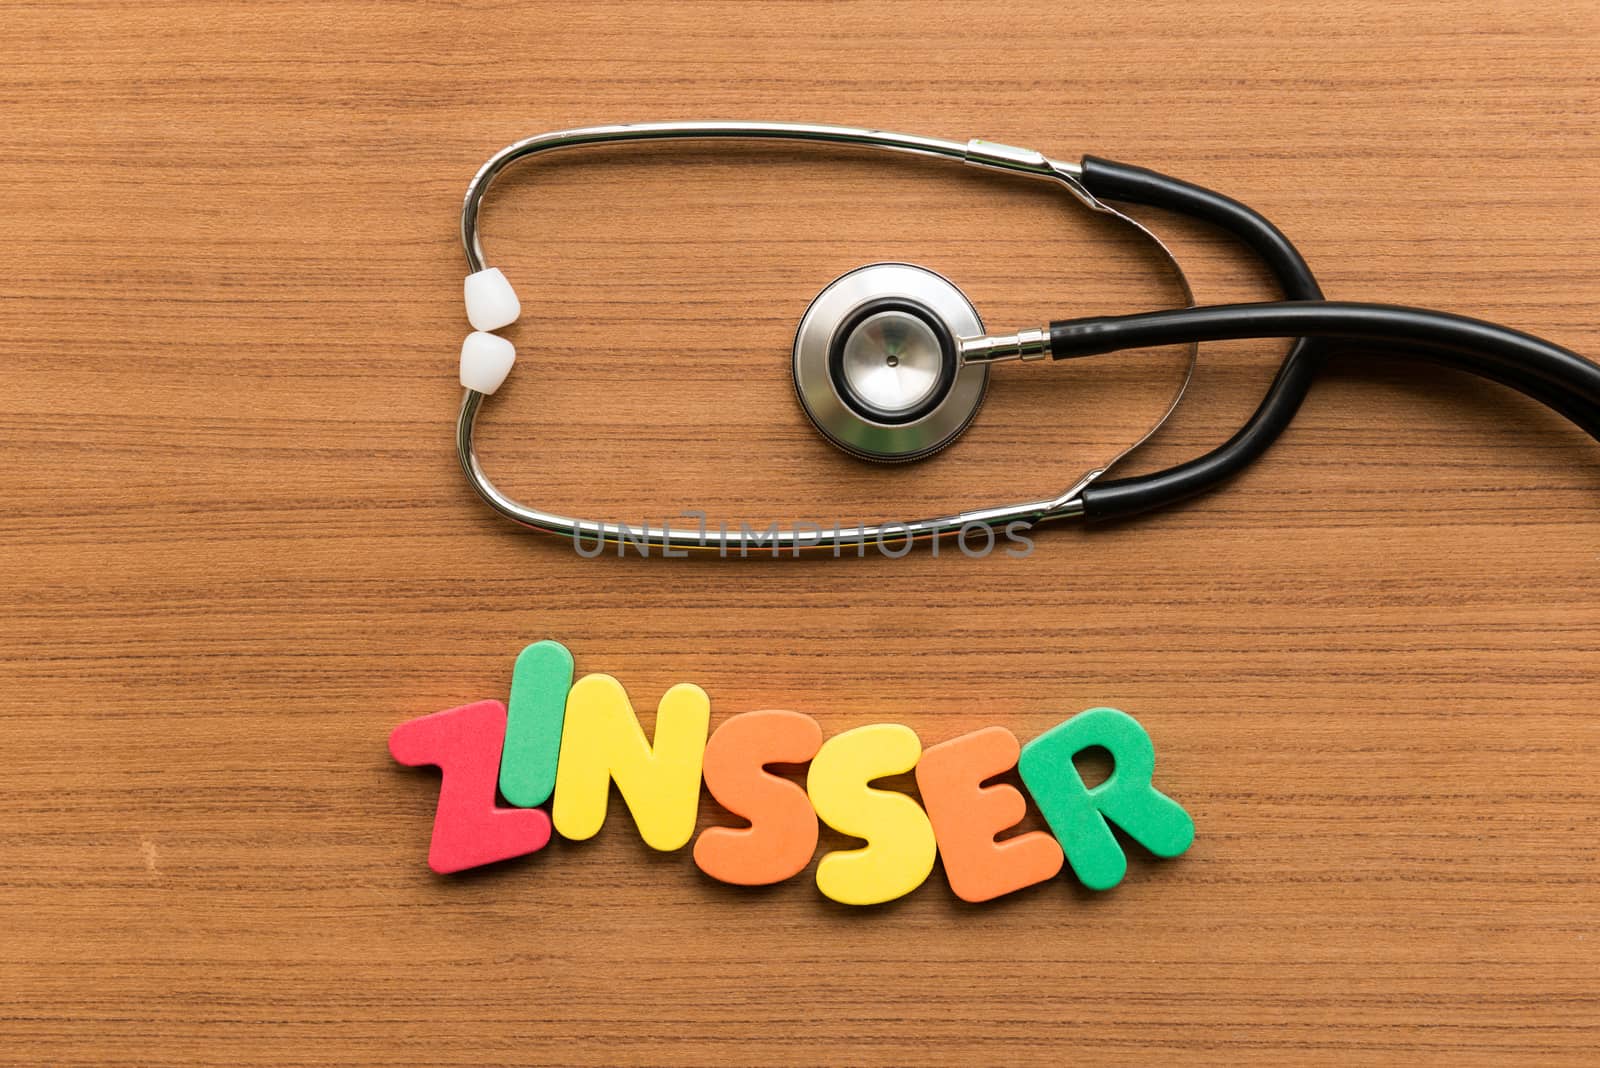 zinsser colorful word with stethoscope on wooden background